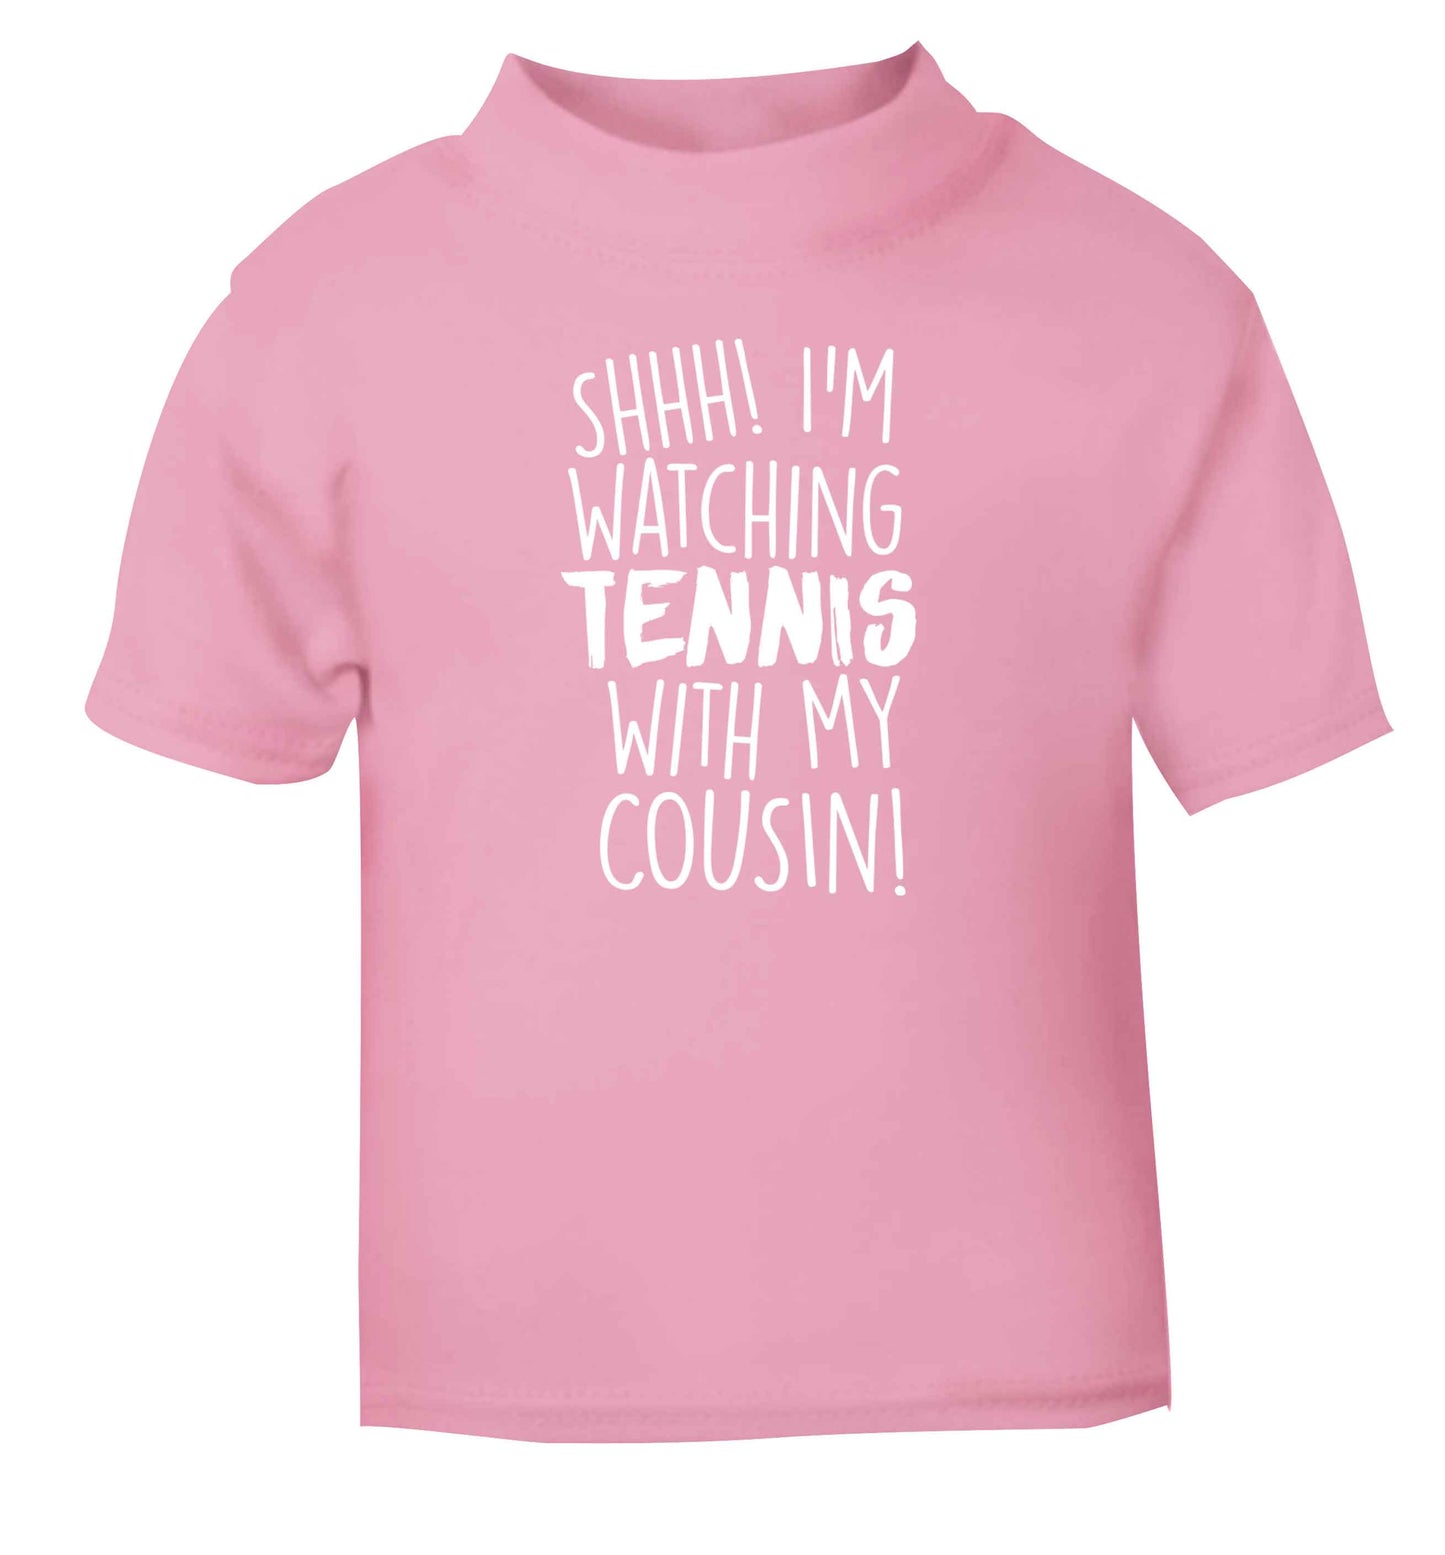 Shh! I'm watching tennis with my cousin! light pink Baby Toddler Tshirt 2 Years